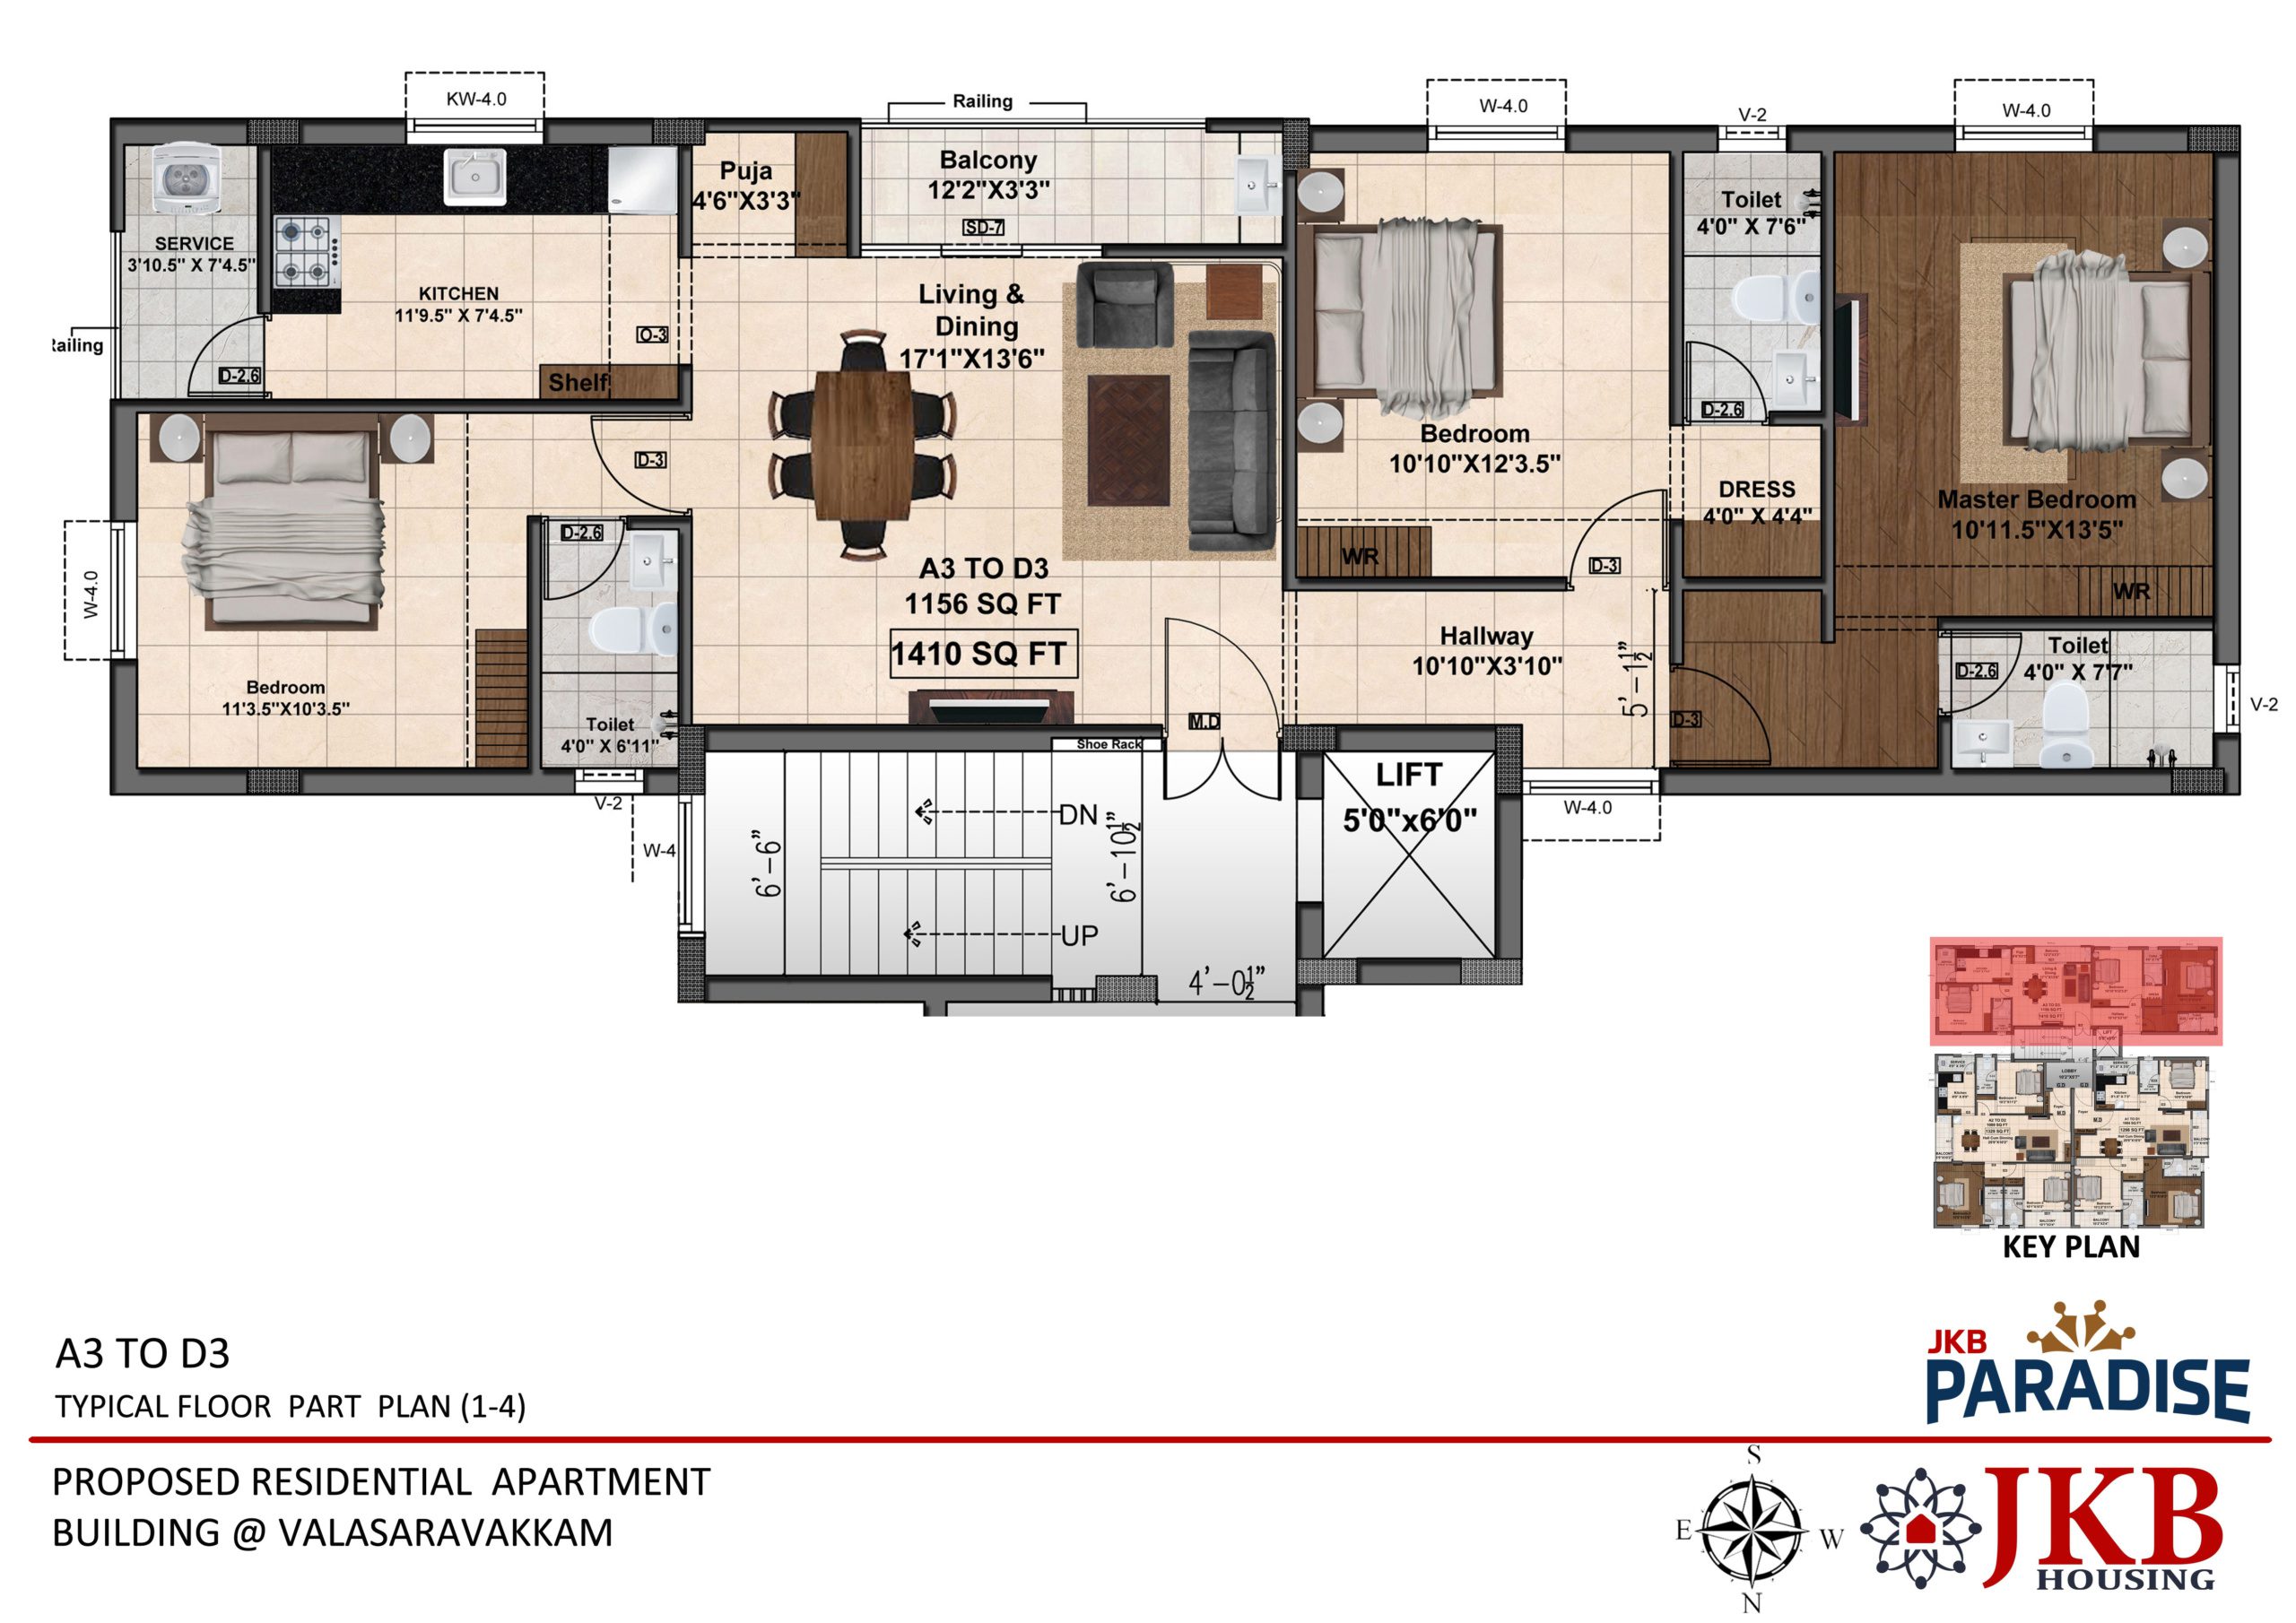 JKB-Paradise-A3-to-D3-Typical-Floor-Part-Plan